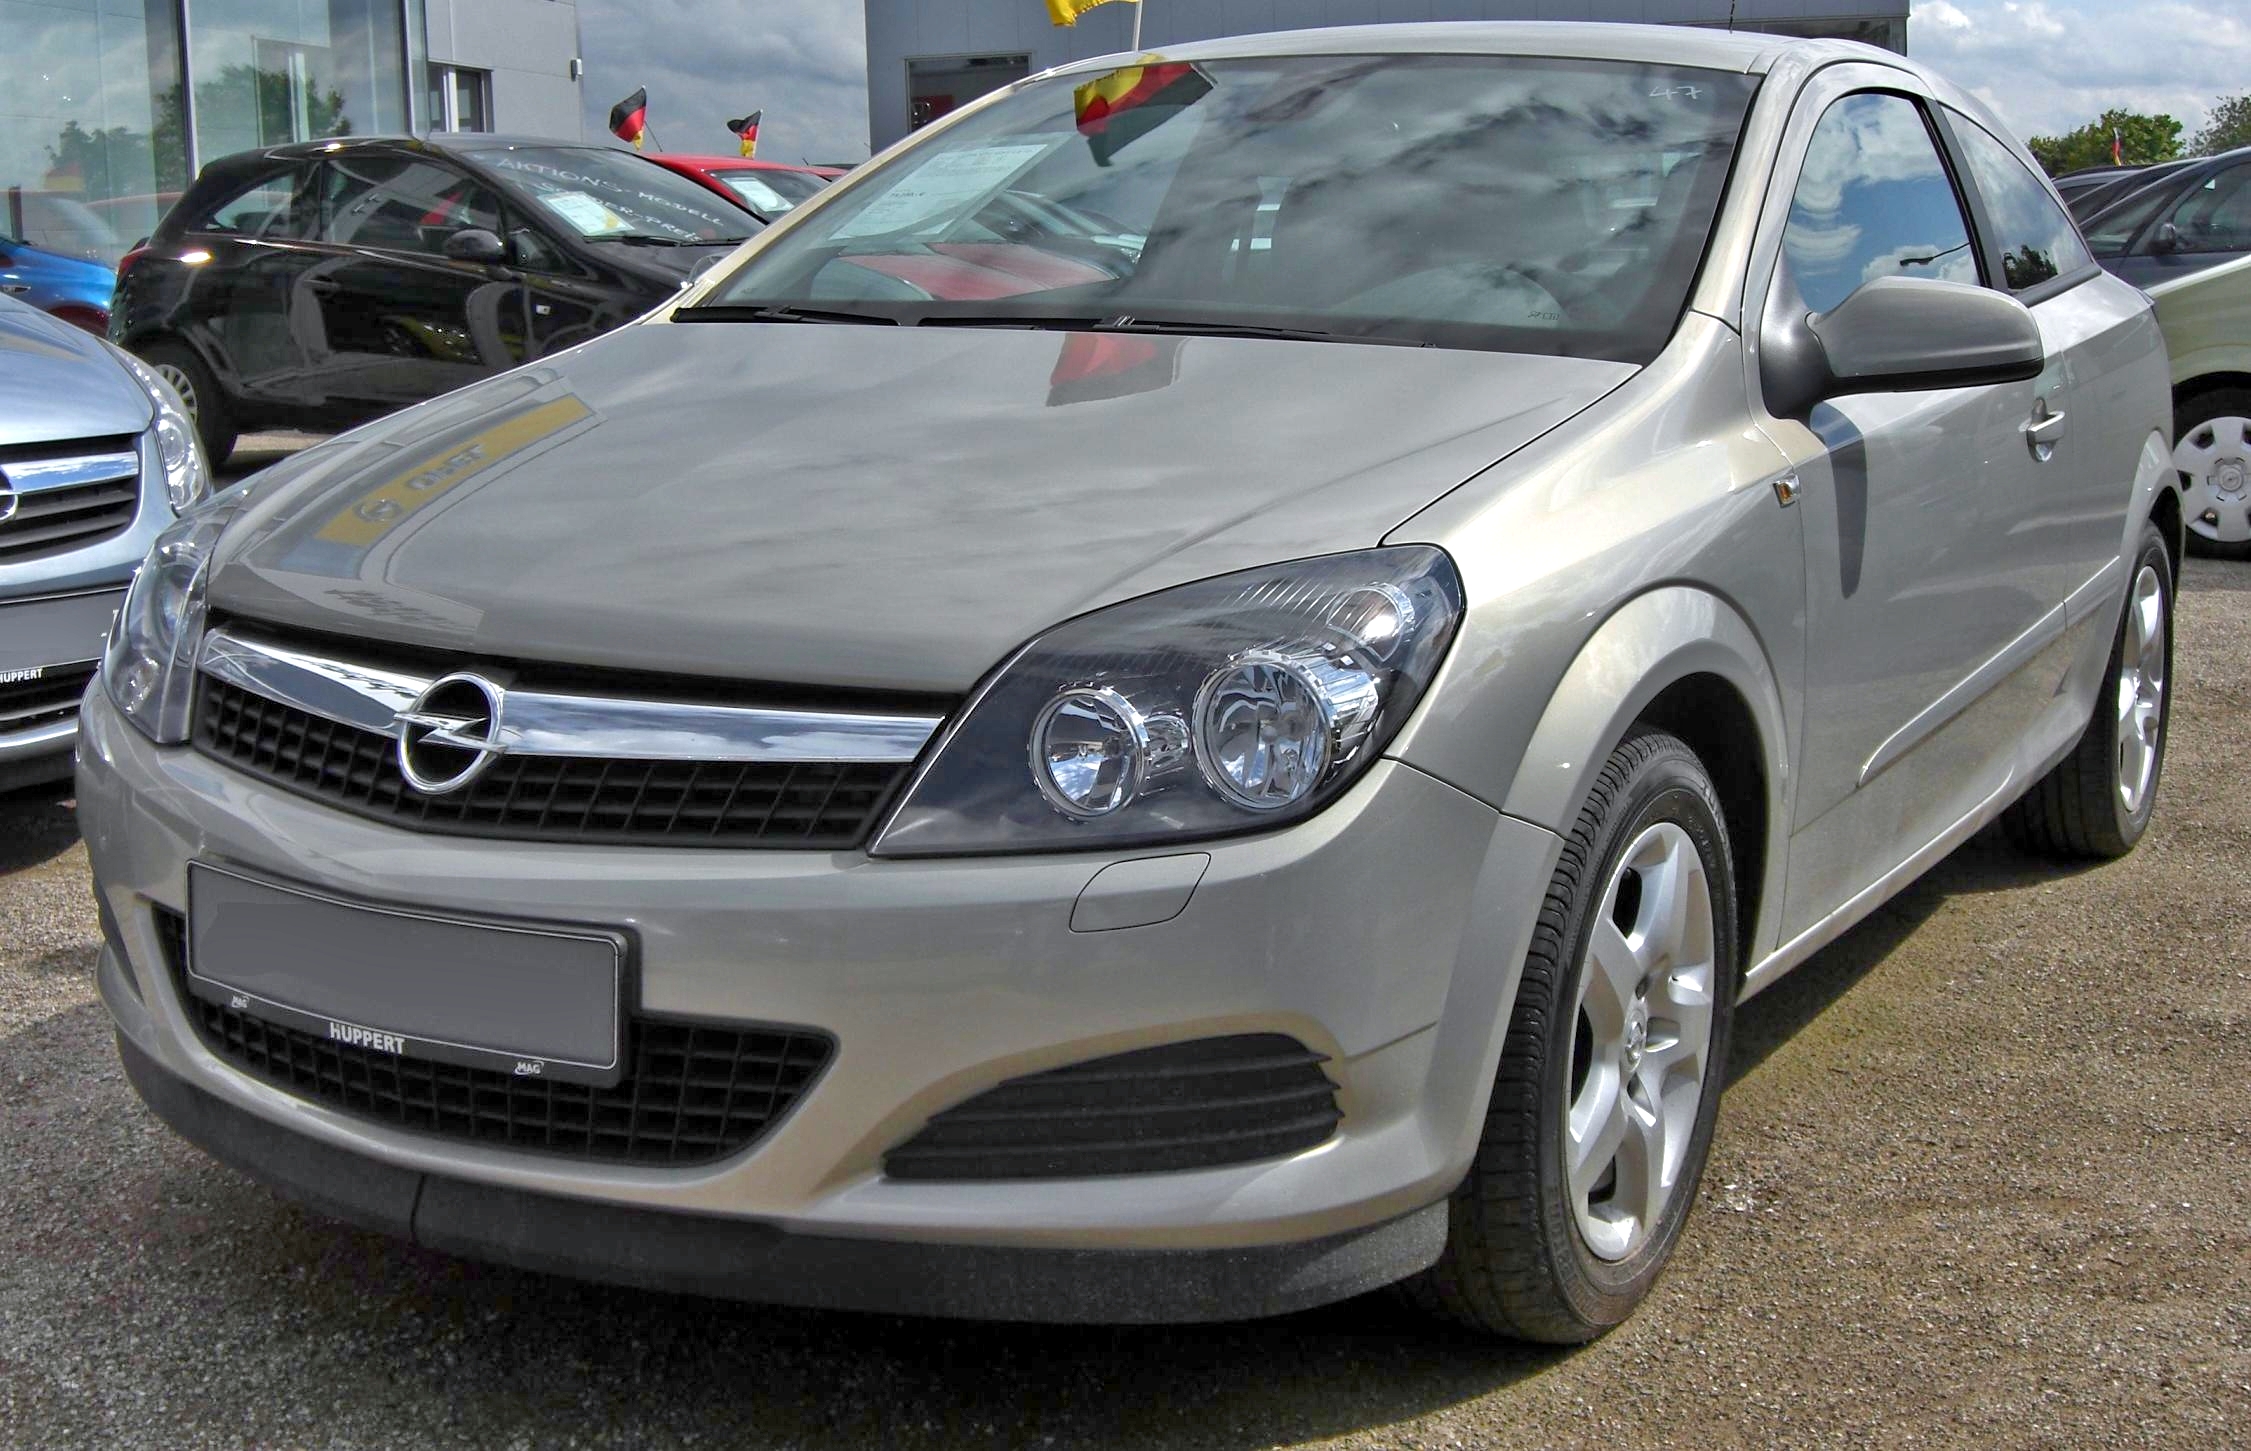 File:Opel Astra GTC front.jpg - Wikimedia Commons